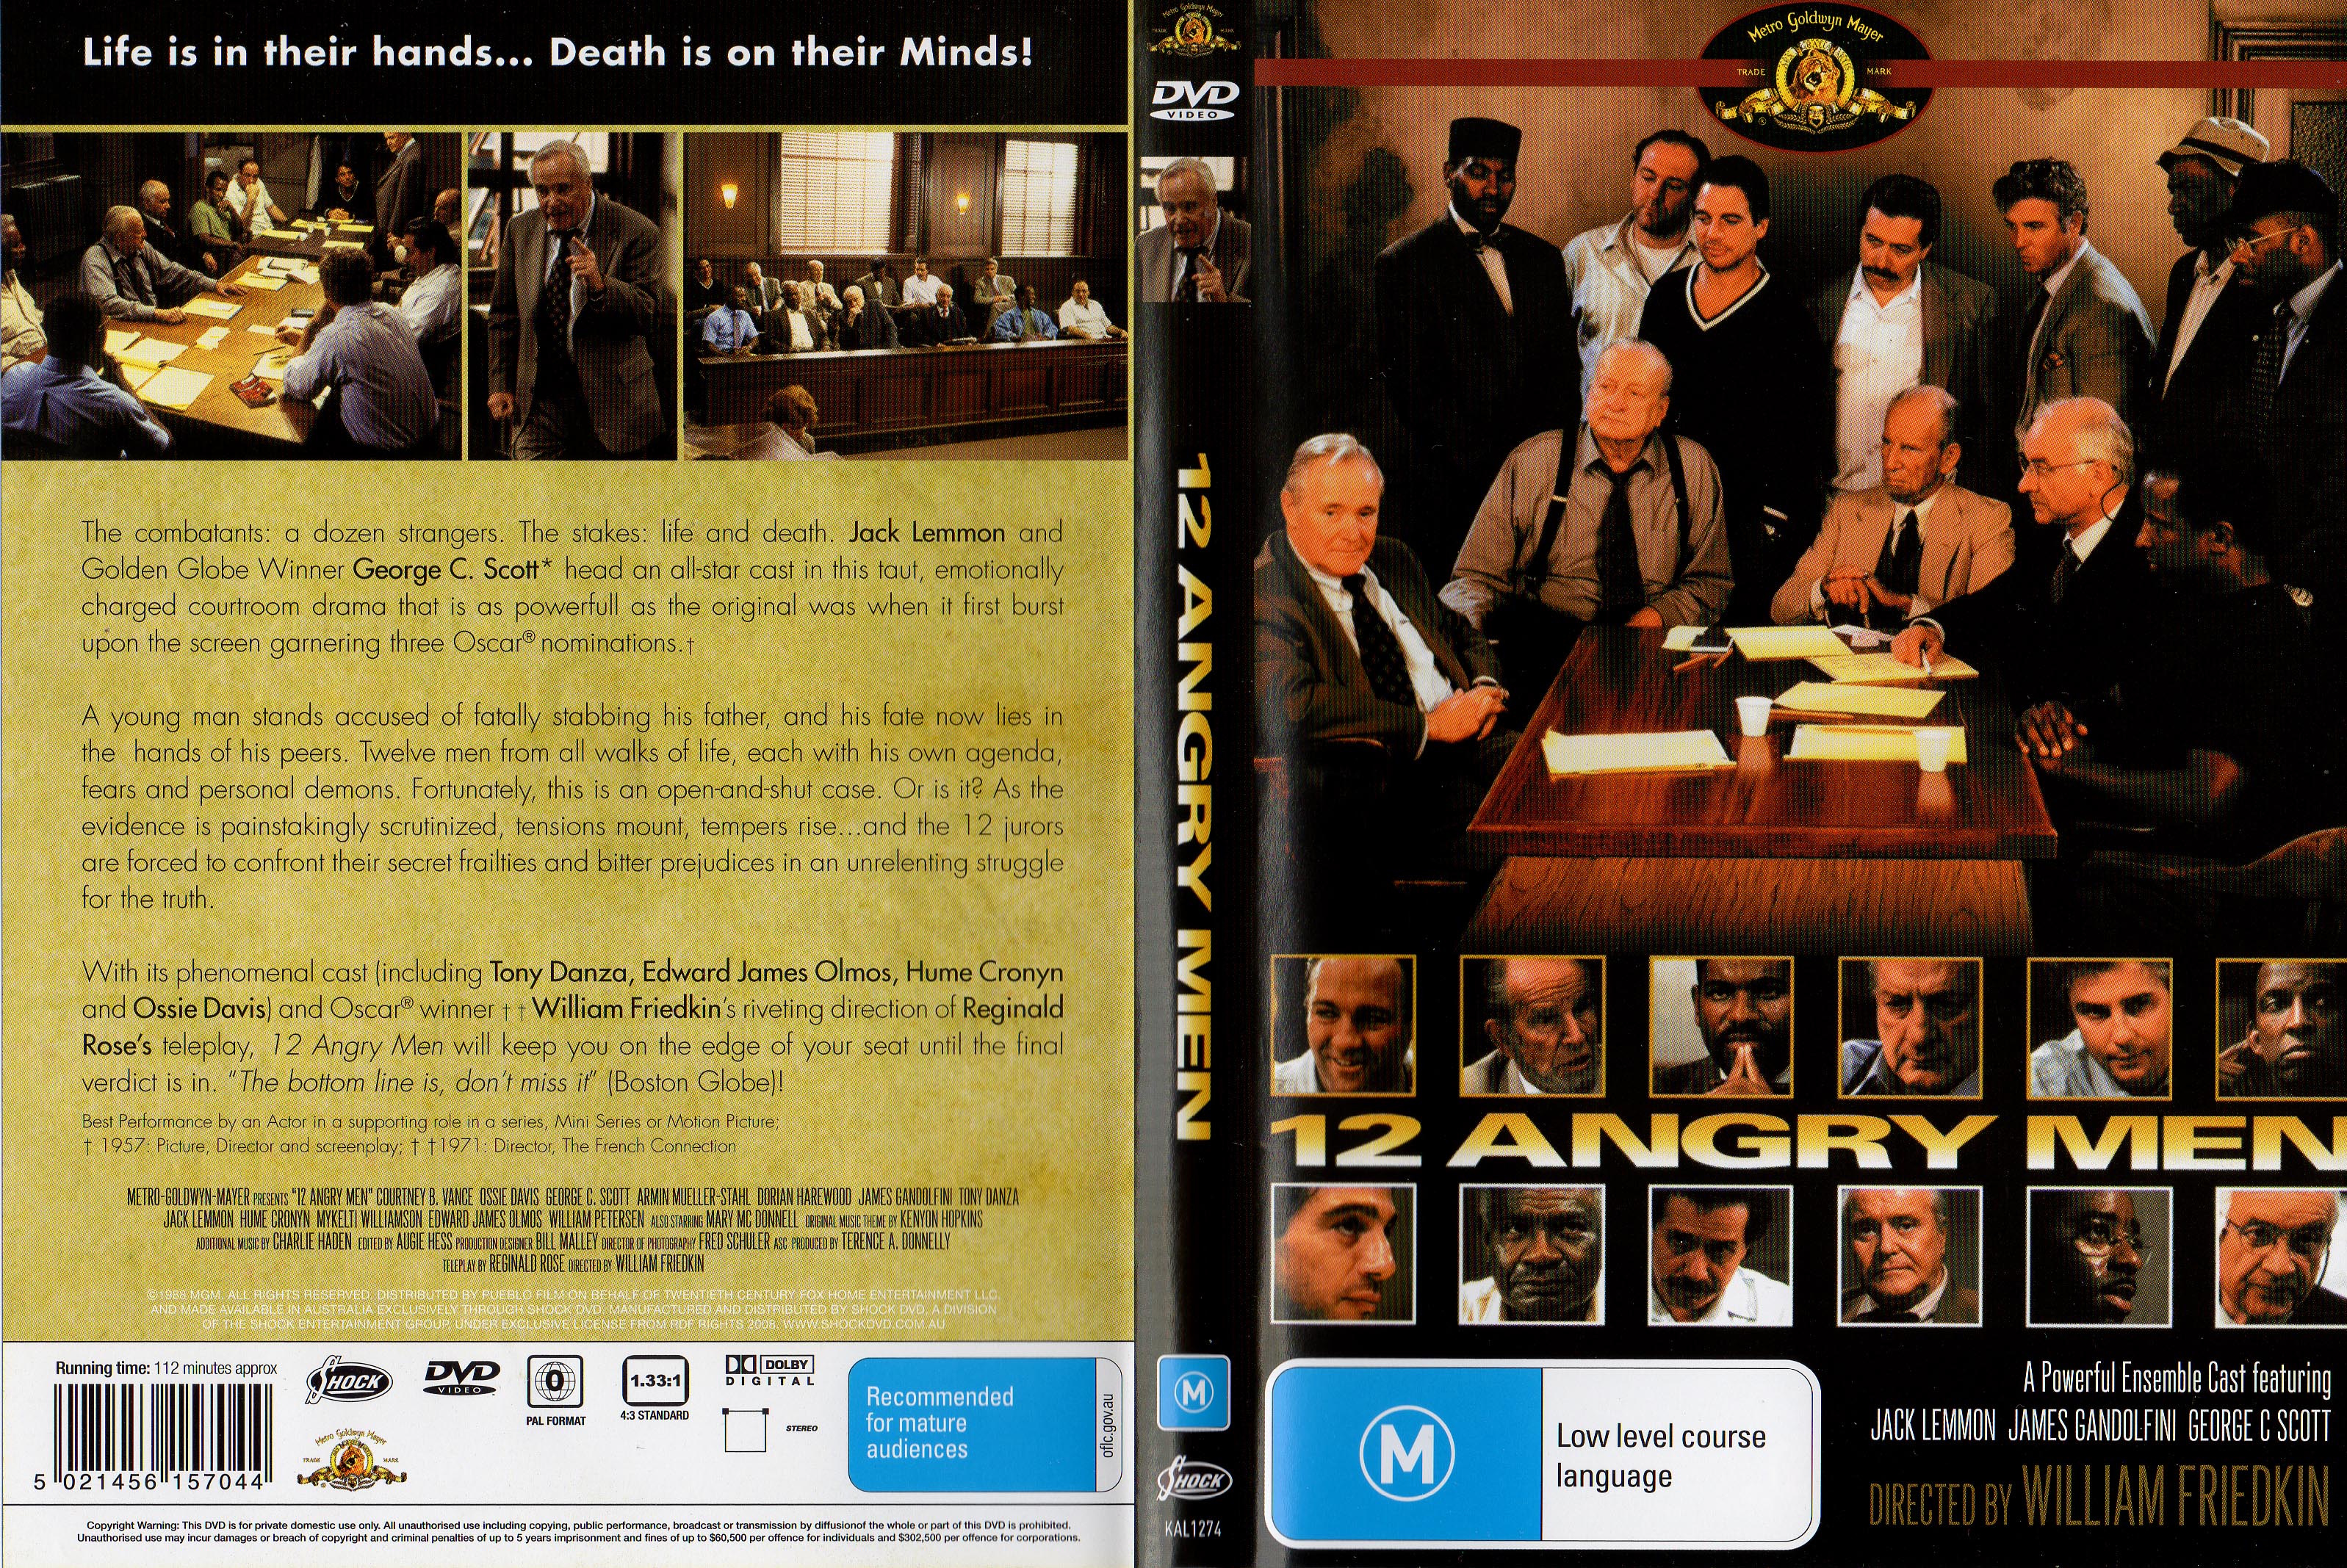 Jaquette DVD 12 angry men (1997) Zone 1